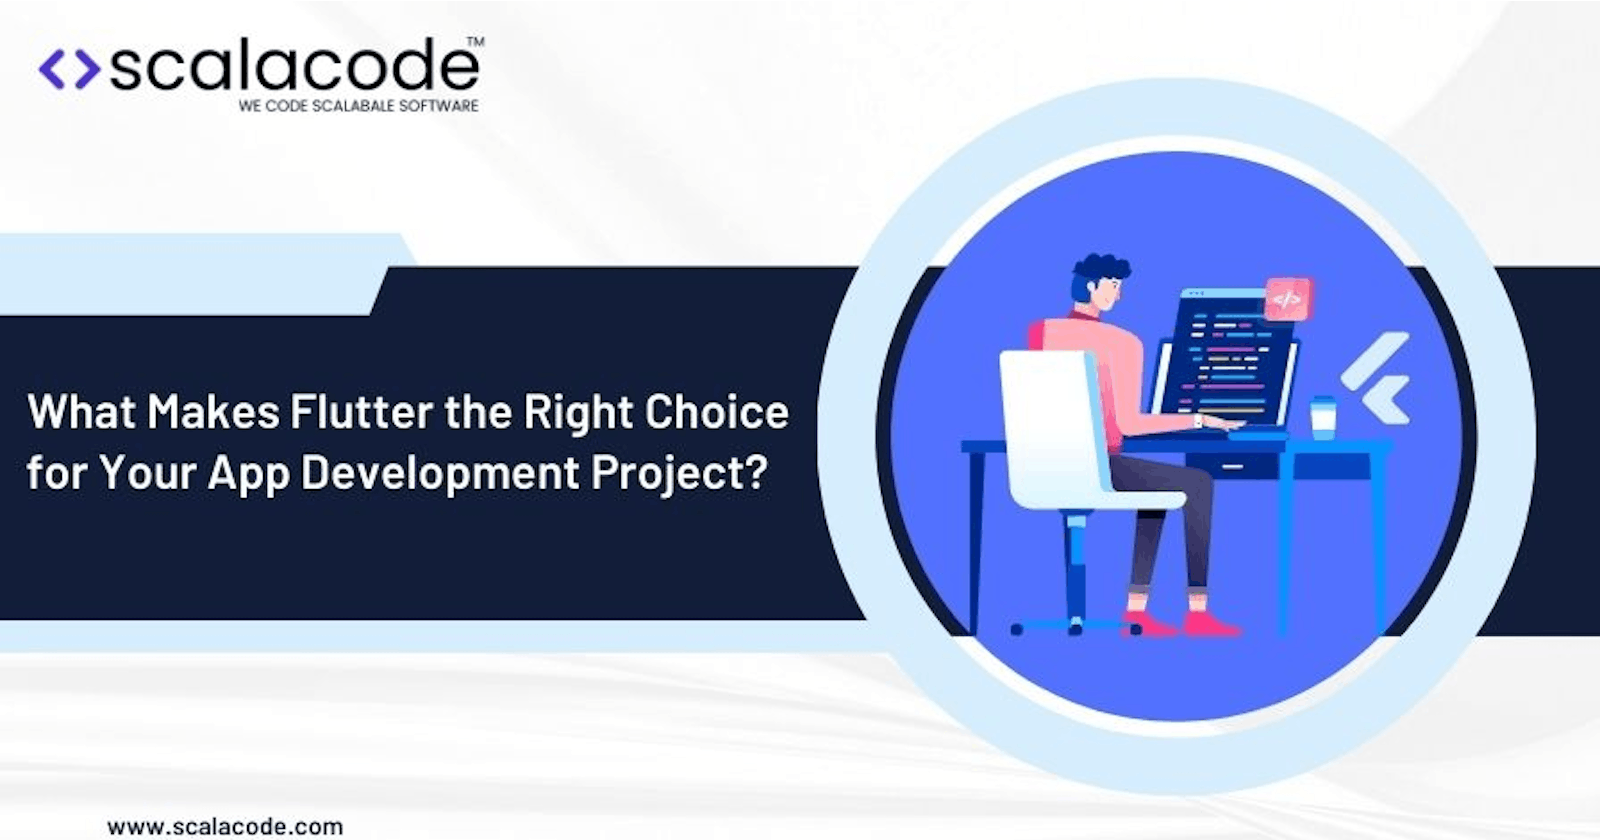 What Makes Flutter the Right Choice for Your App Development Project?